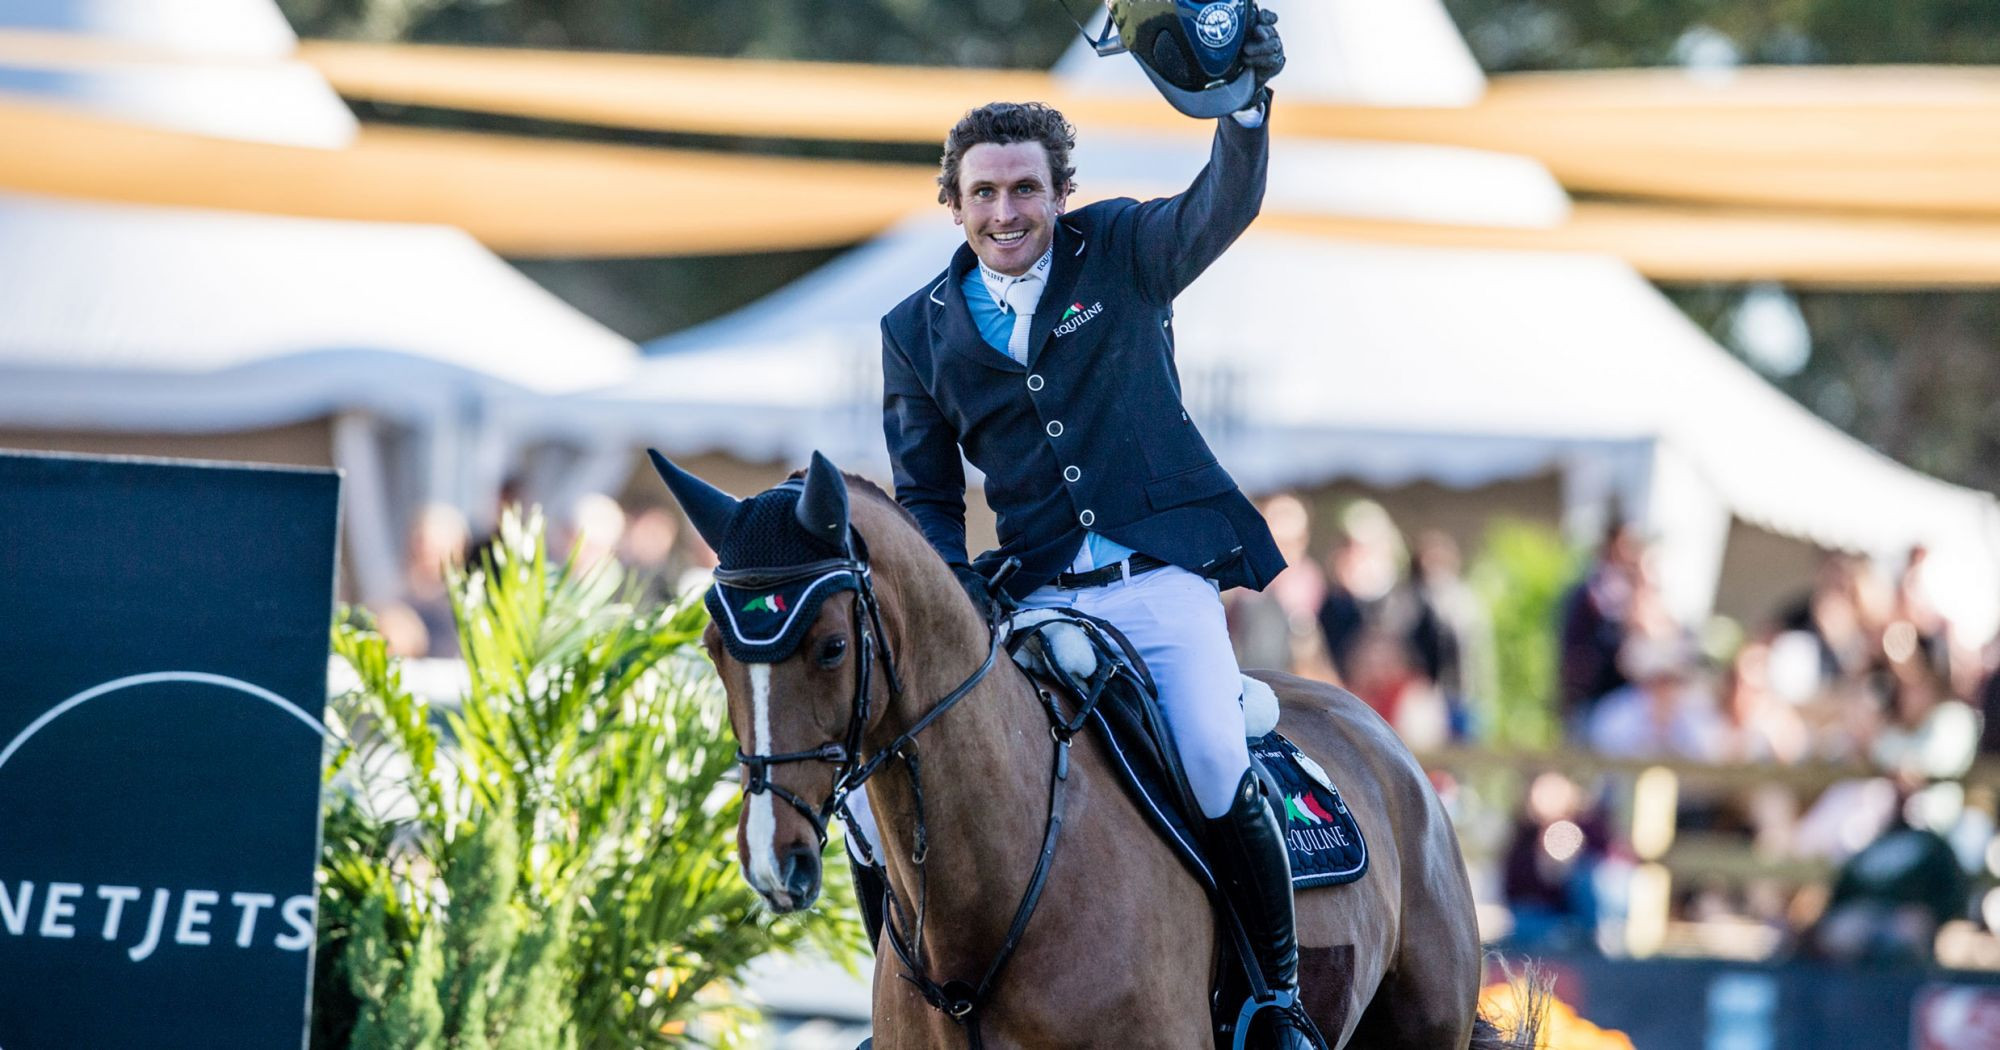 Darragh Kenny of Ireland triumphed at the Wellington leg of the FEI Jumping World Cup ©Getty Images